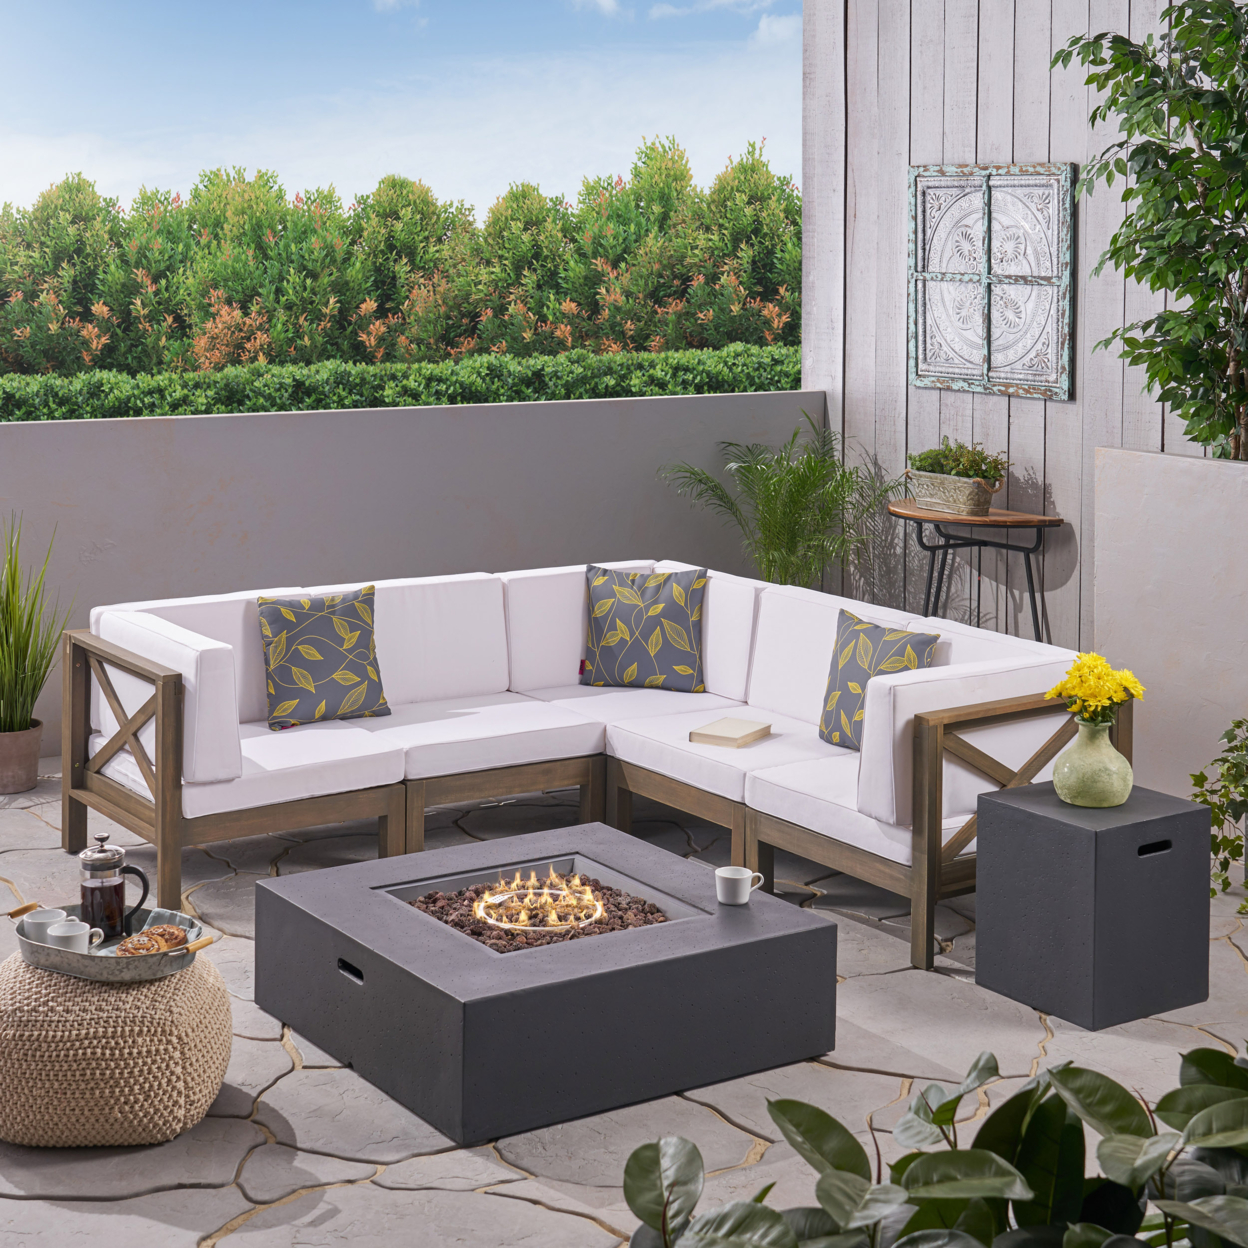 Cytheria Outdoor Acacia Wood 5 Seater Sectional Sofa Set With Fire Pit - White